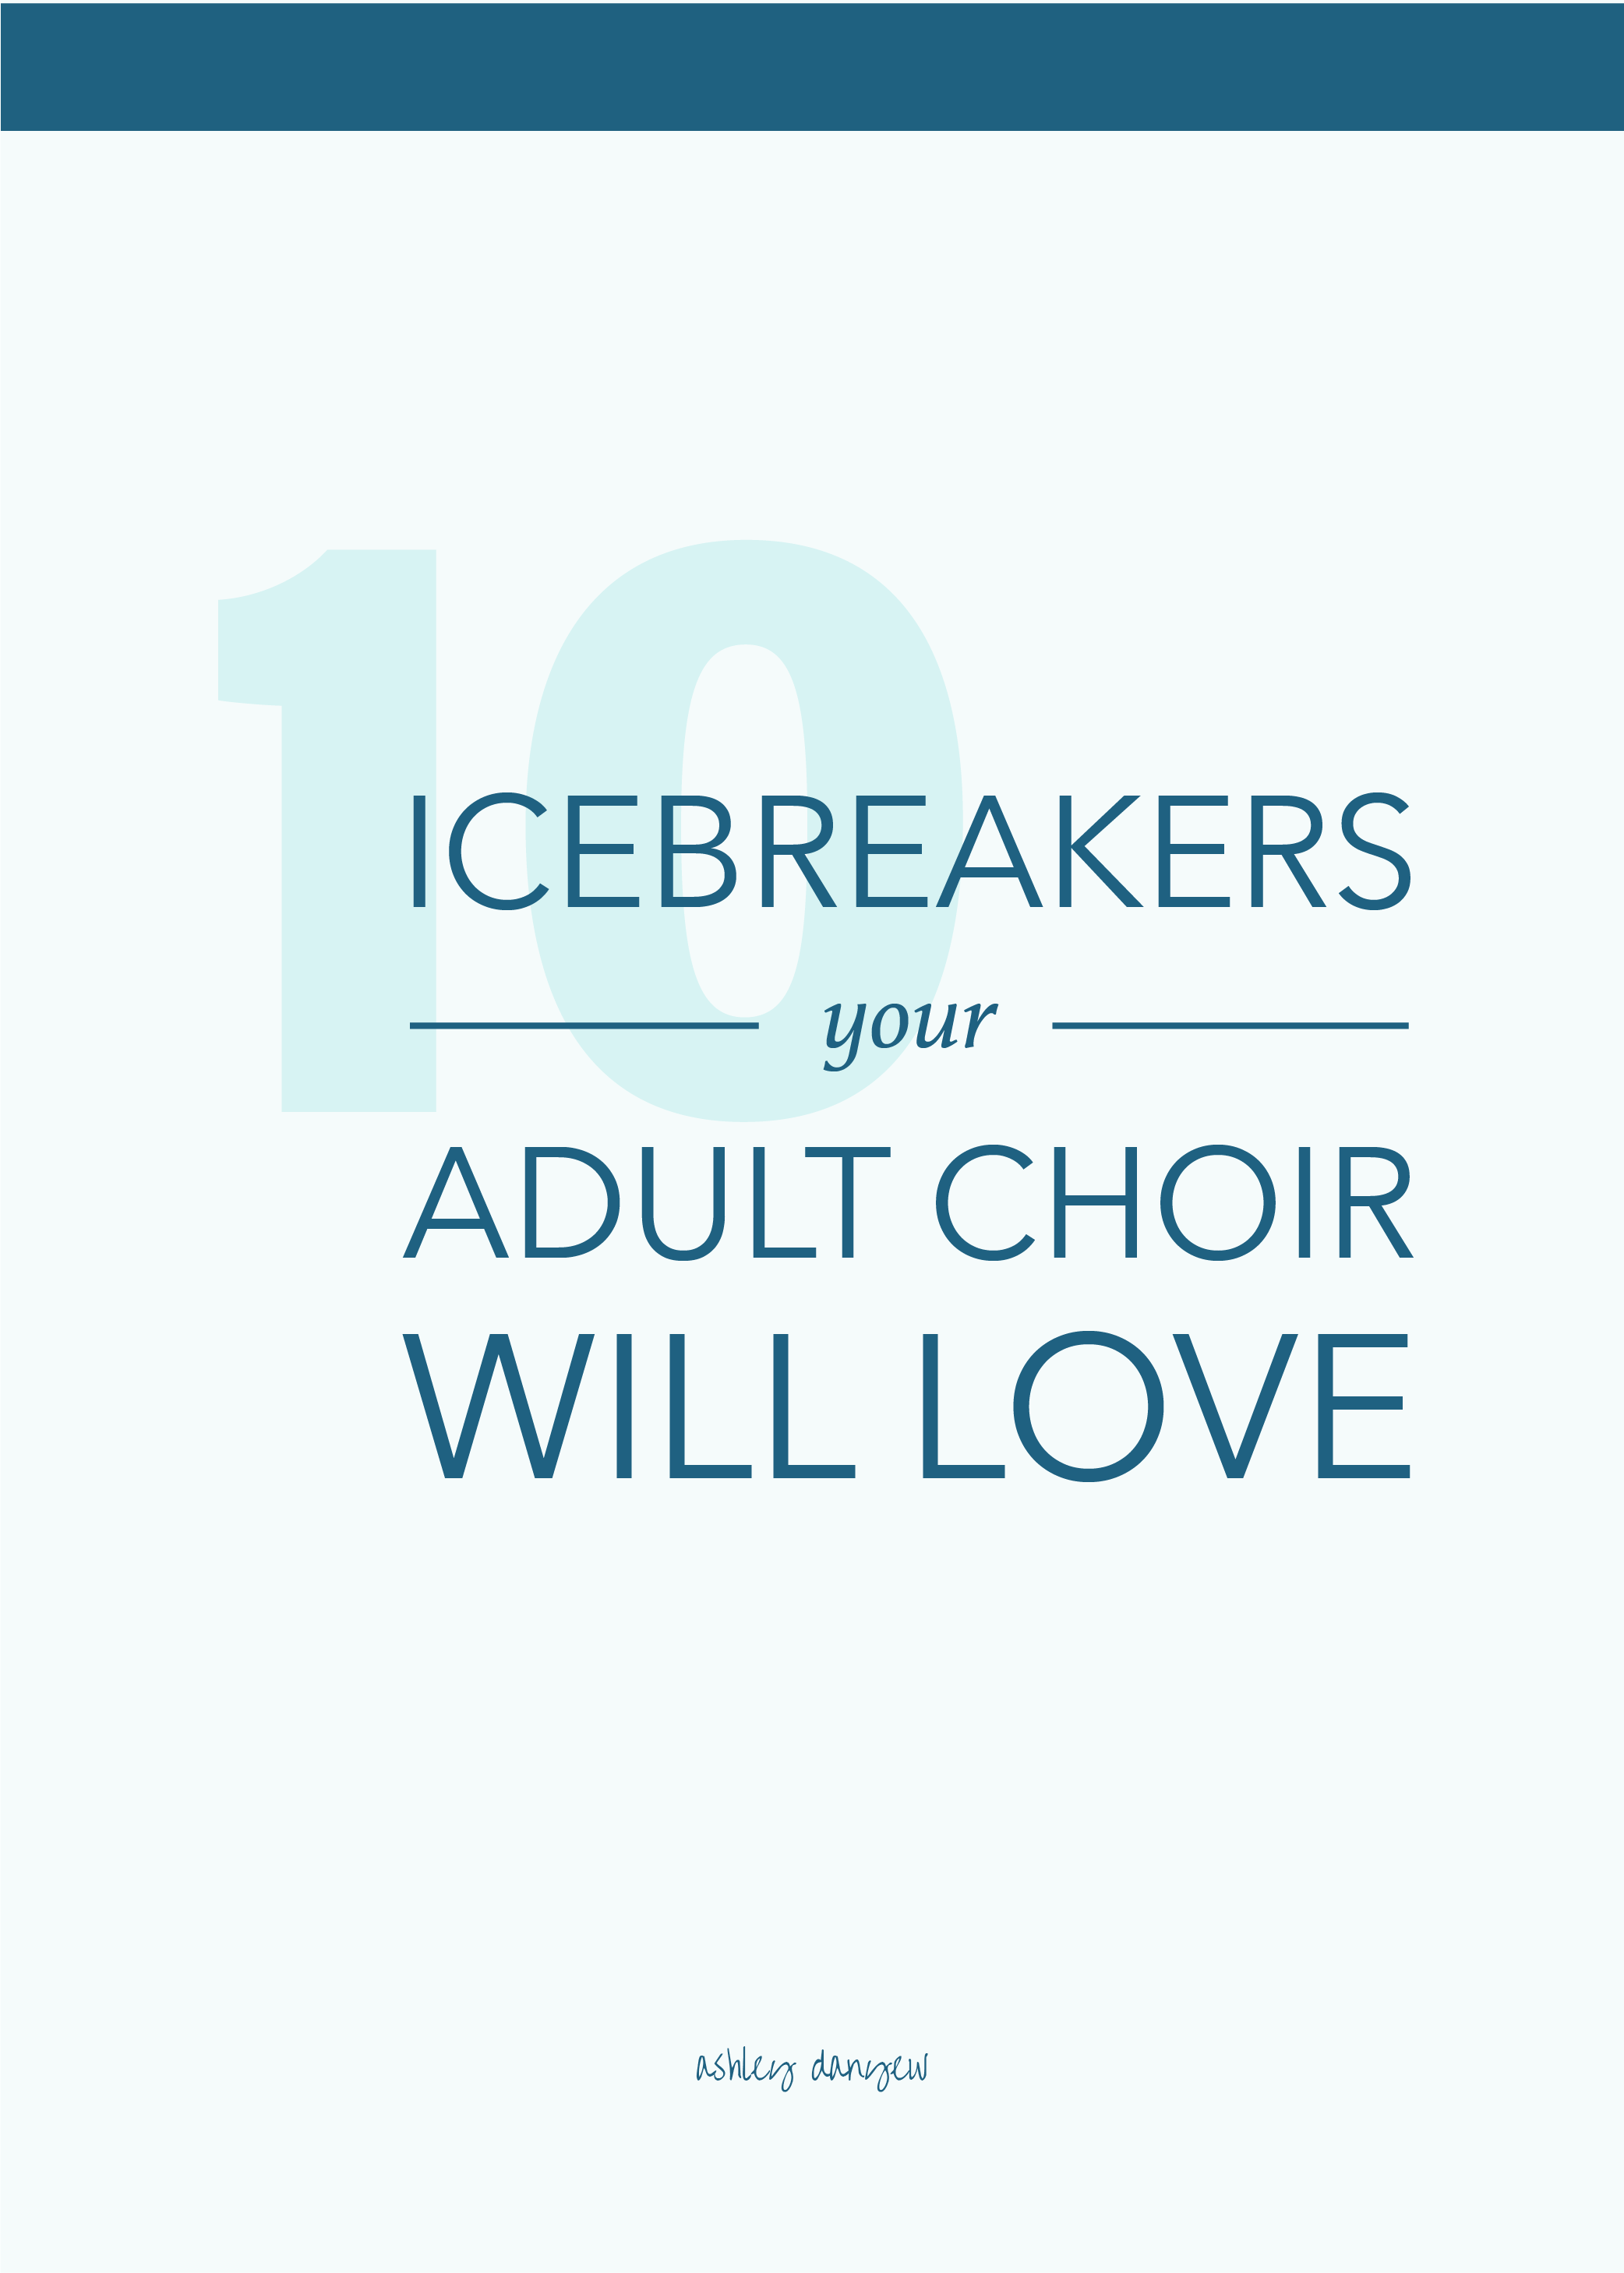 10 Icebreakers Your Adult Choir Will Love